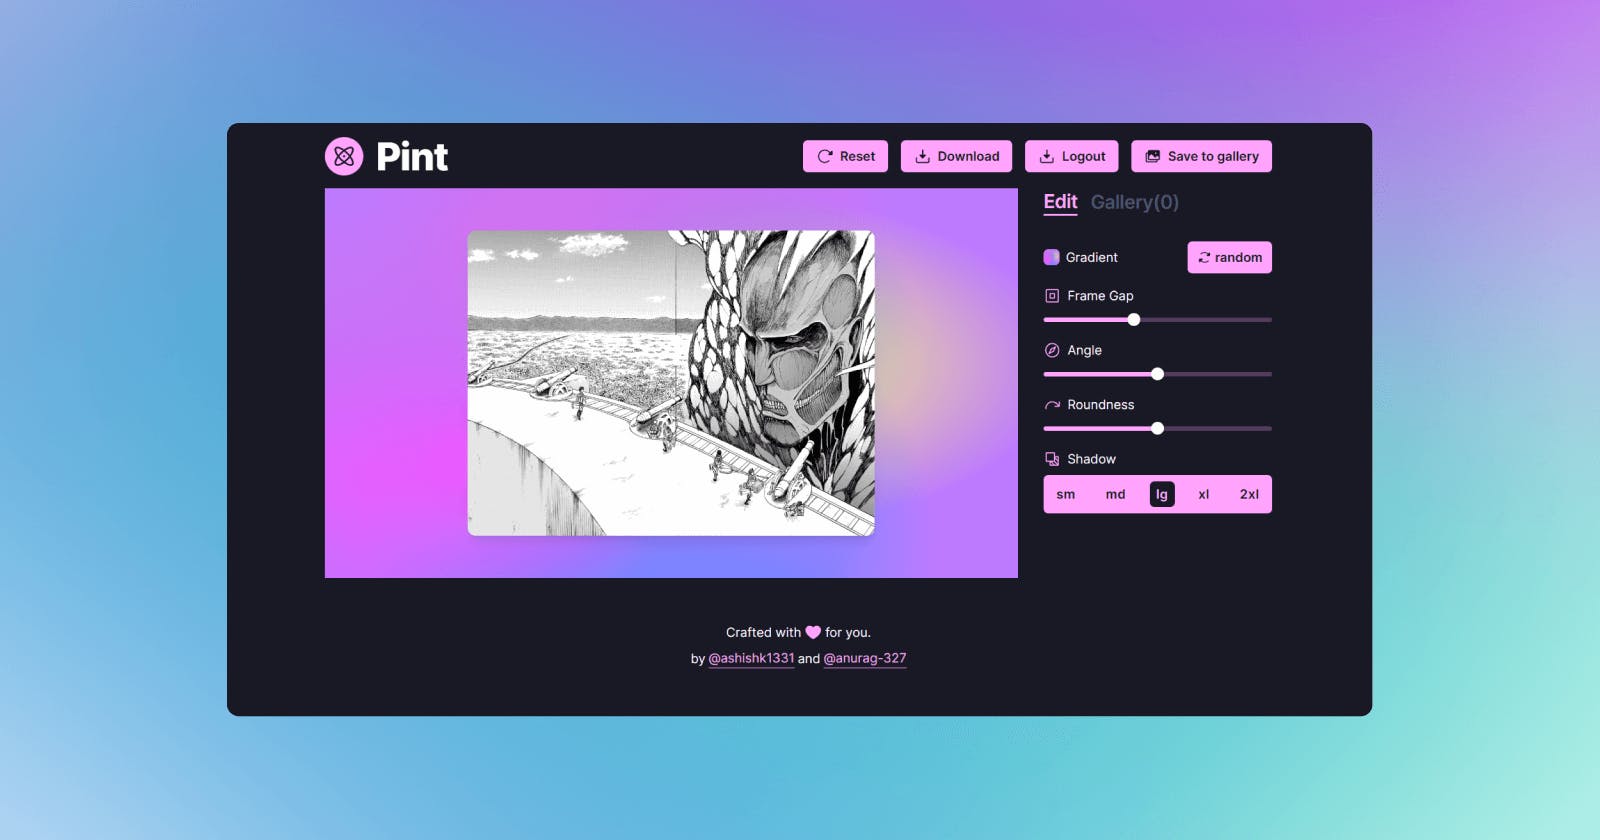 Pint - A way to spice up your images